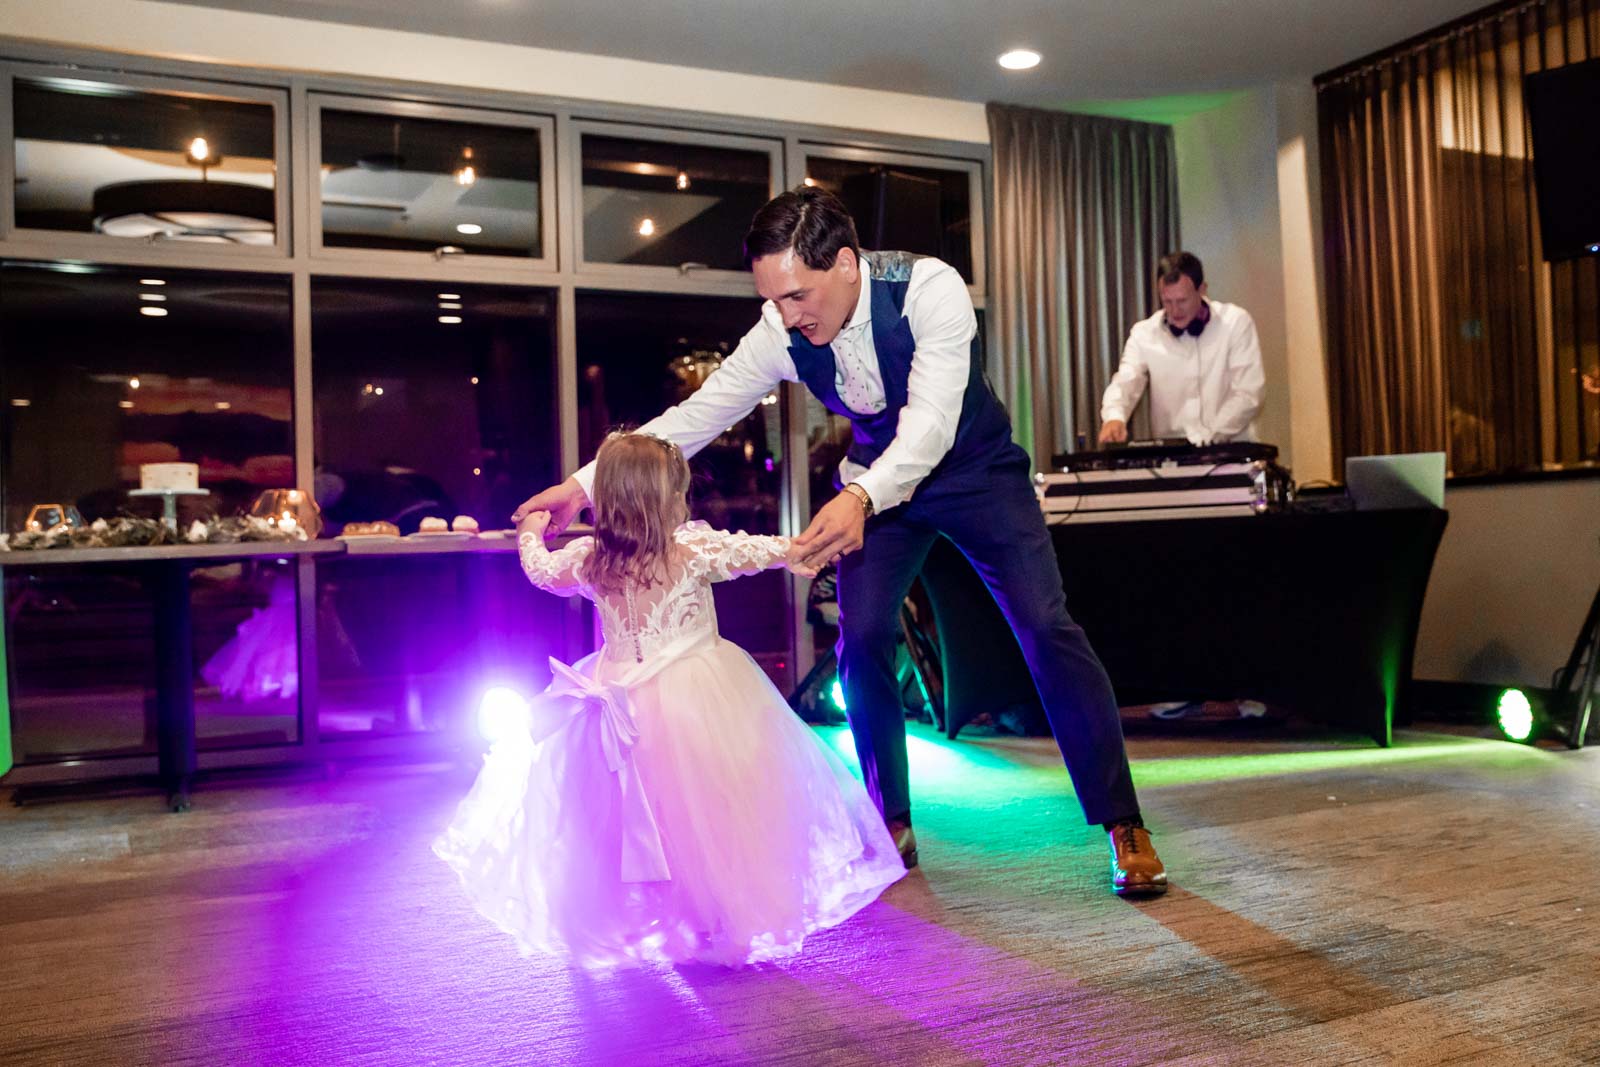 Groom dances with his young daughter